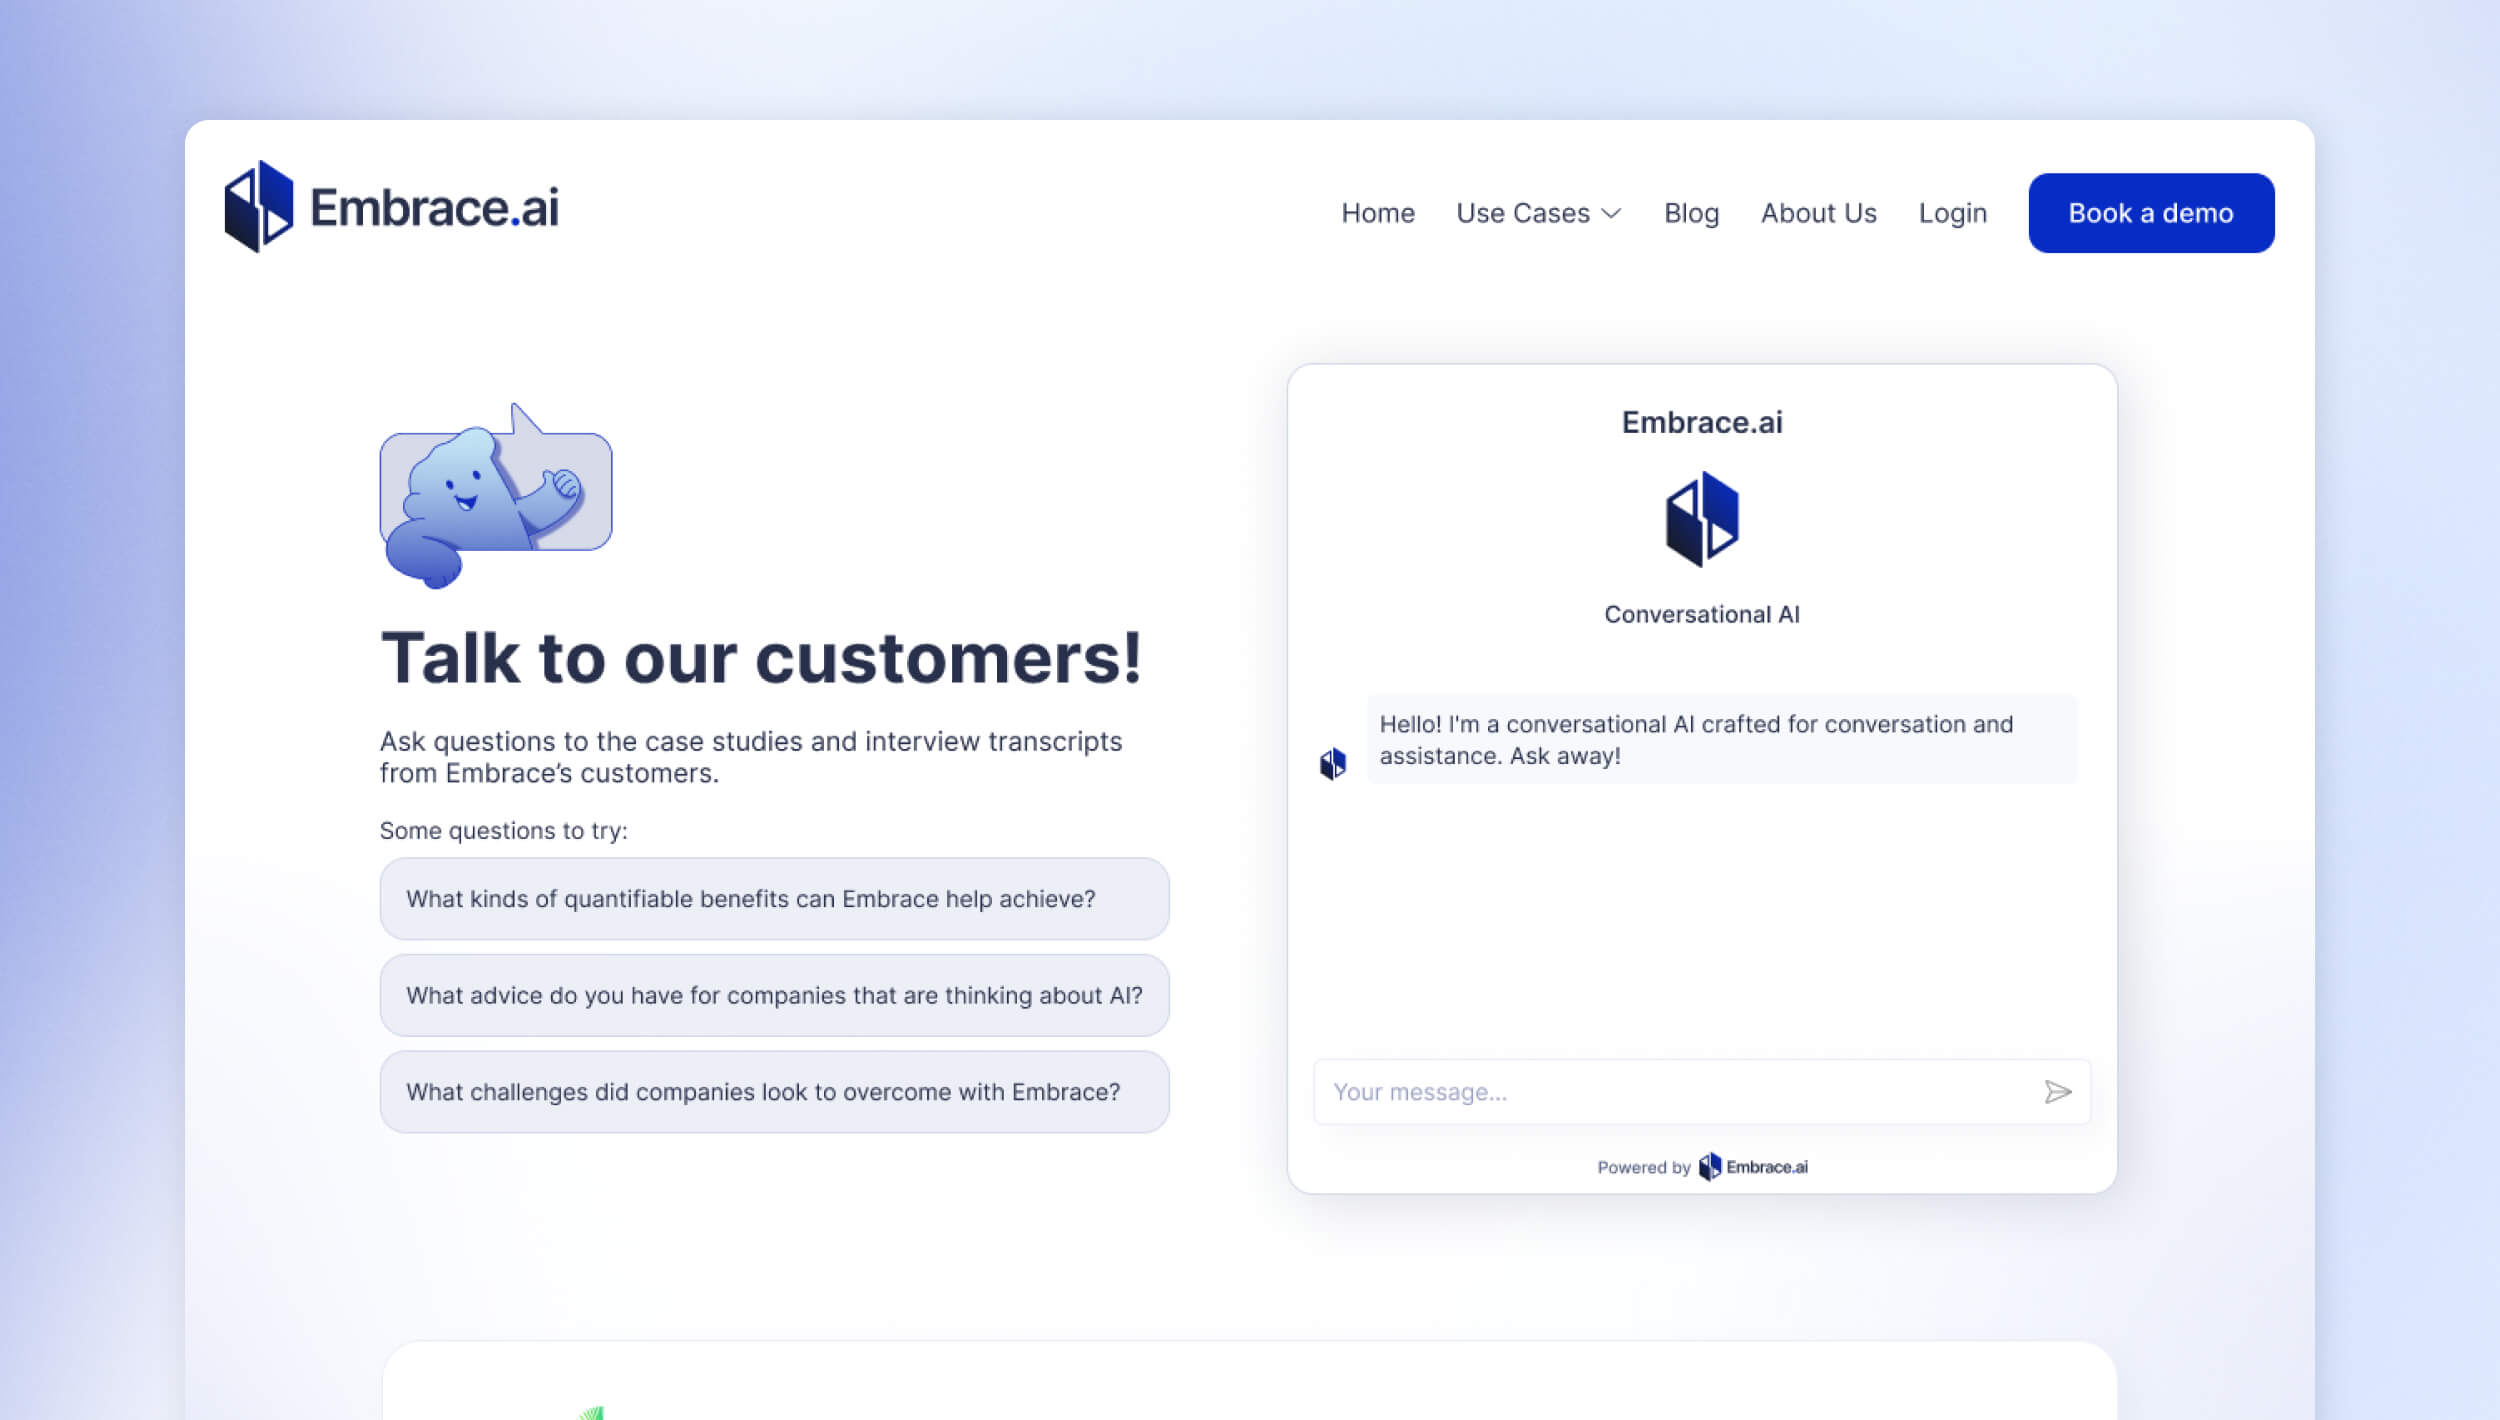 Embrace.ai's customizable embeddable widget, a versatile tool that integrates seamlessly into websites and portals, enhancing user experience with easy access to the AI-driven platform